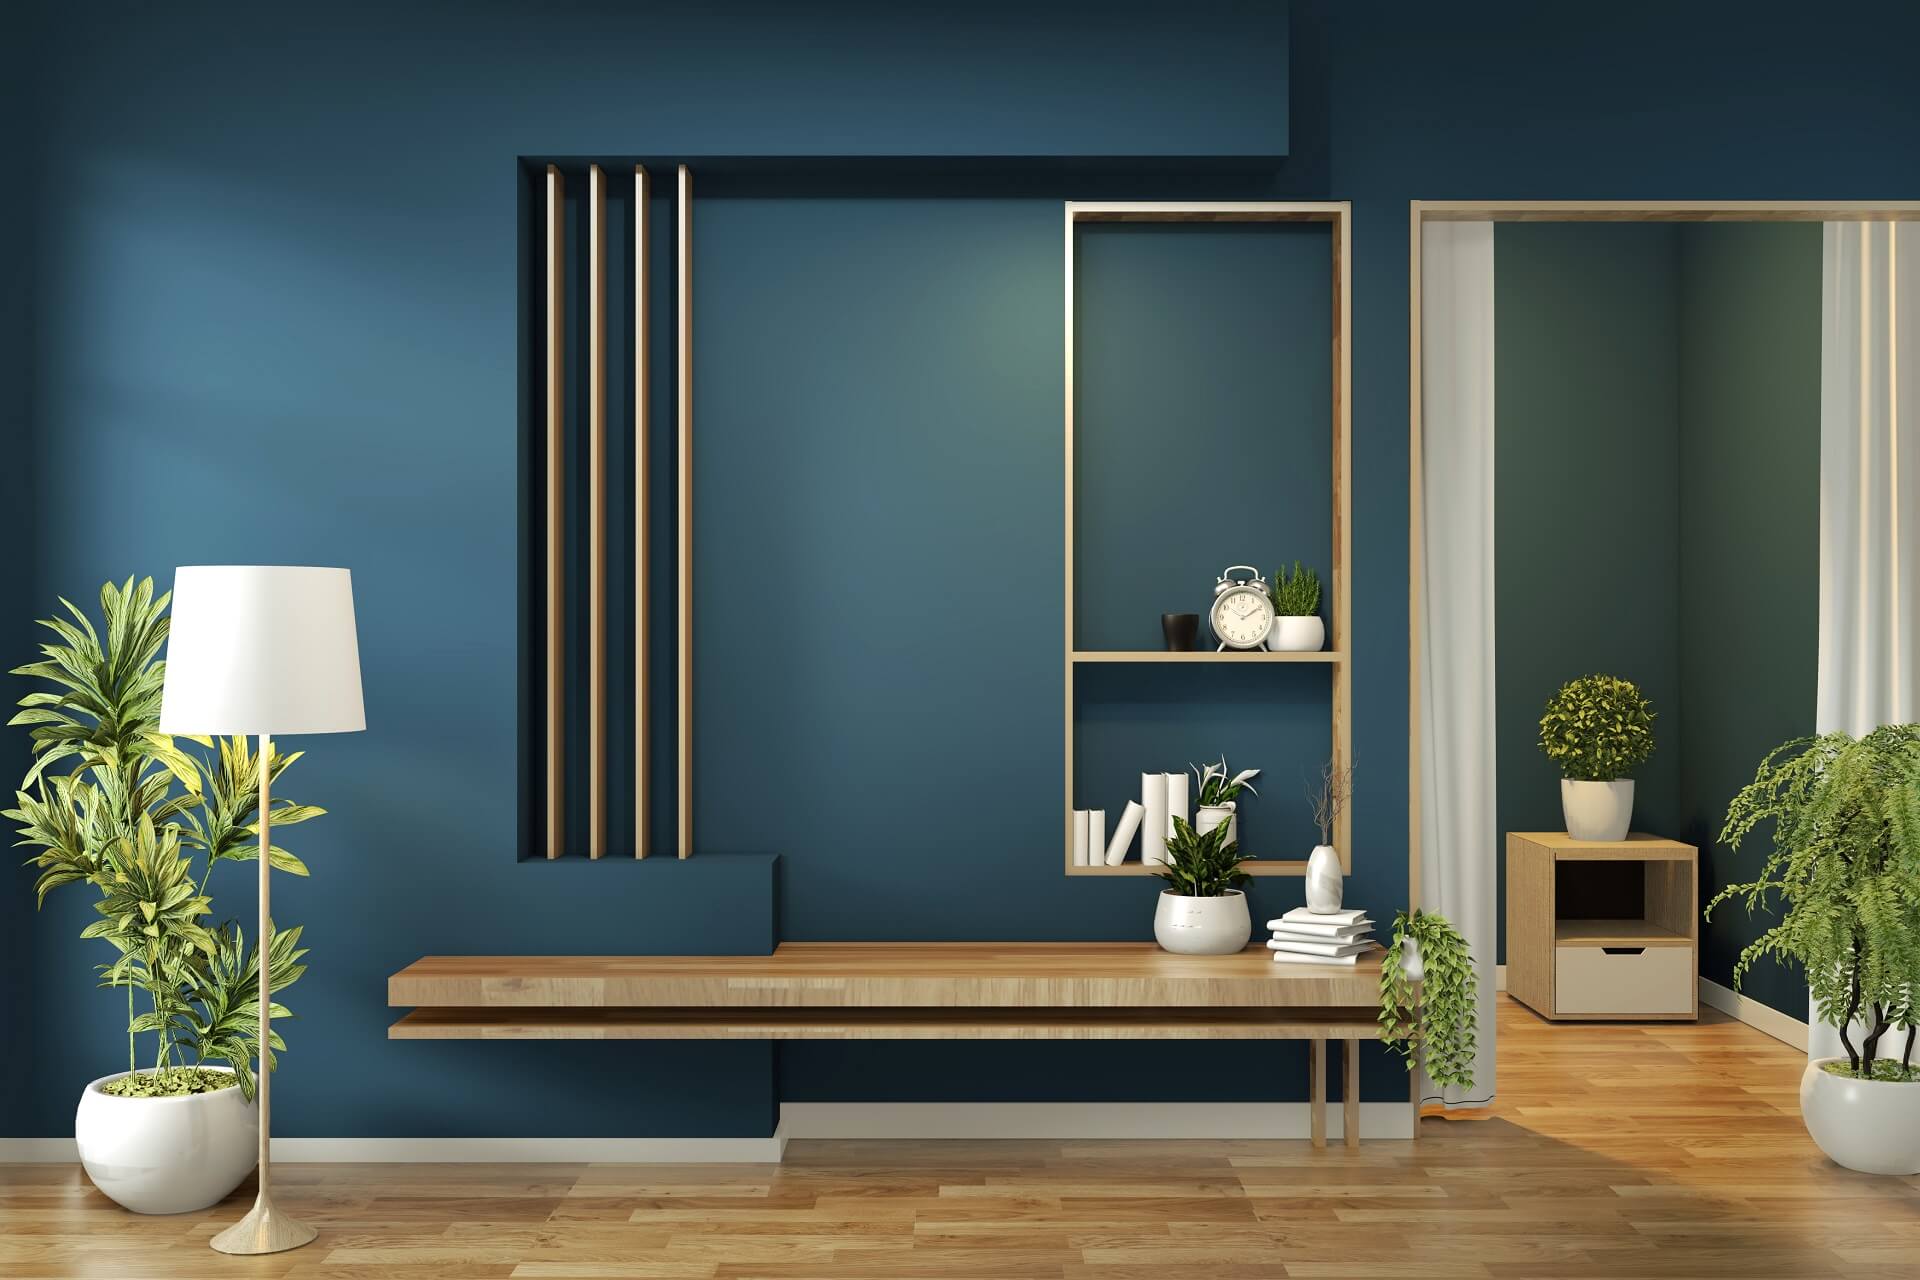 3D Rendering of a modern wooden cabinet against the navy blue wall.